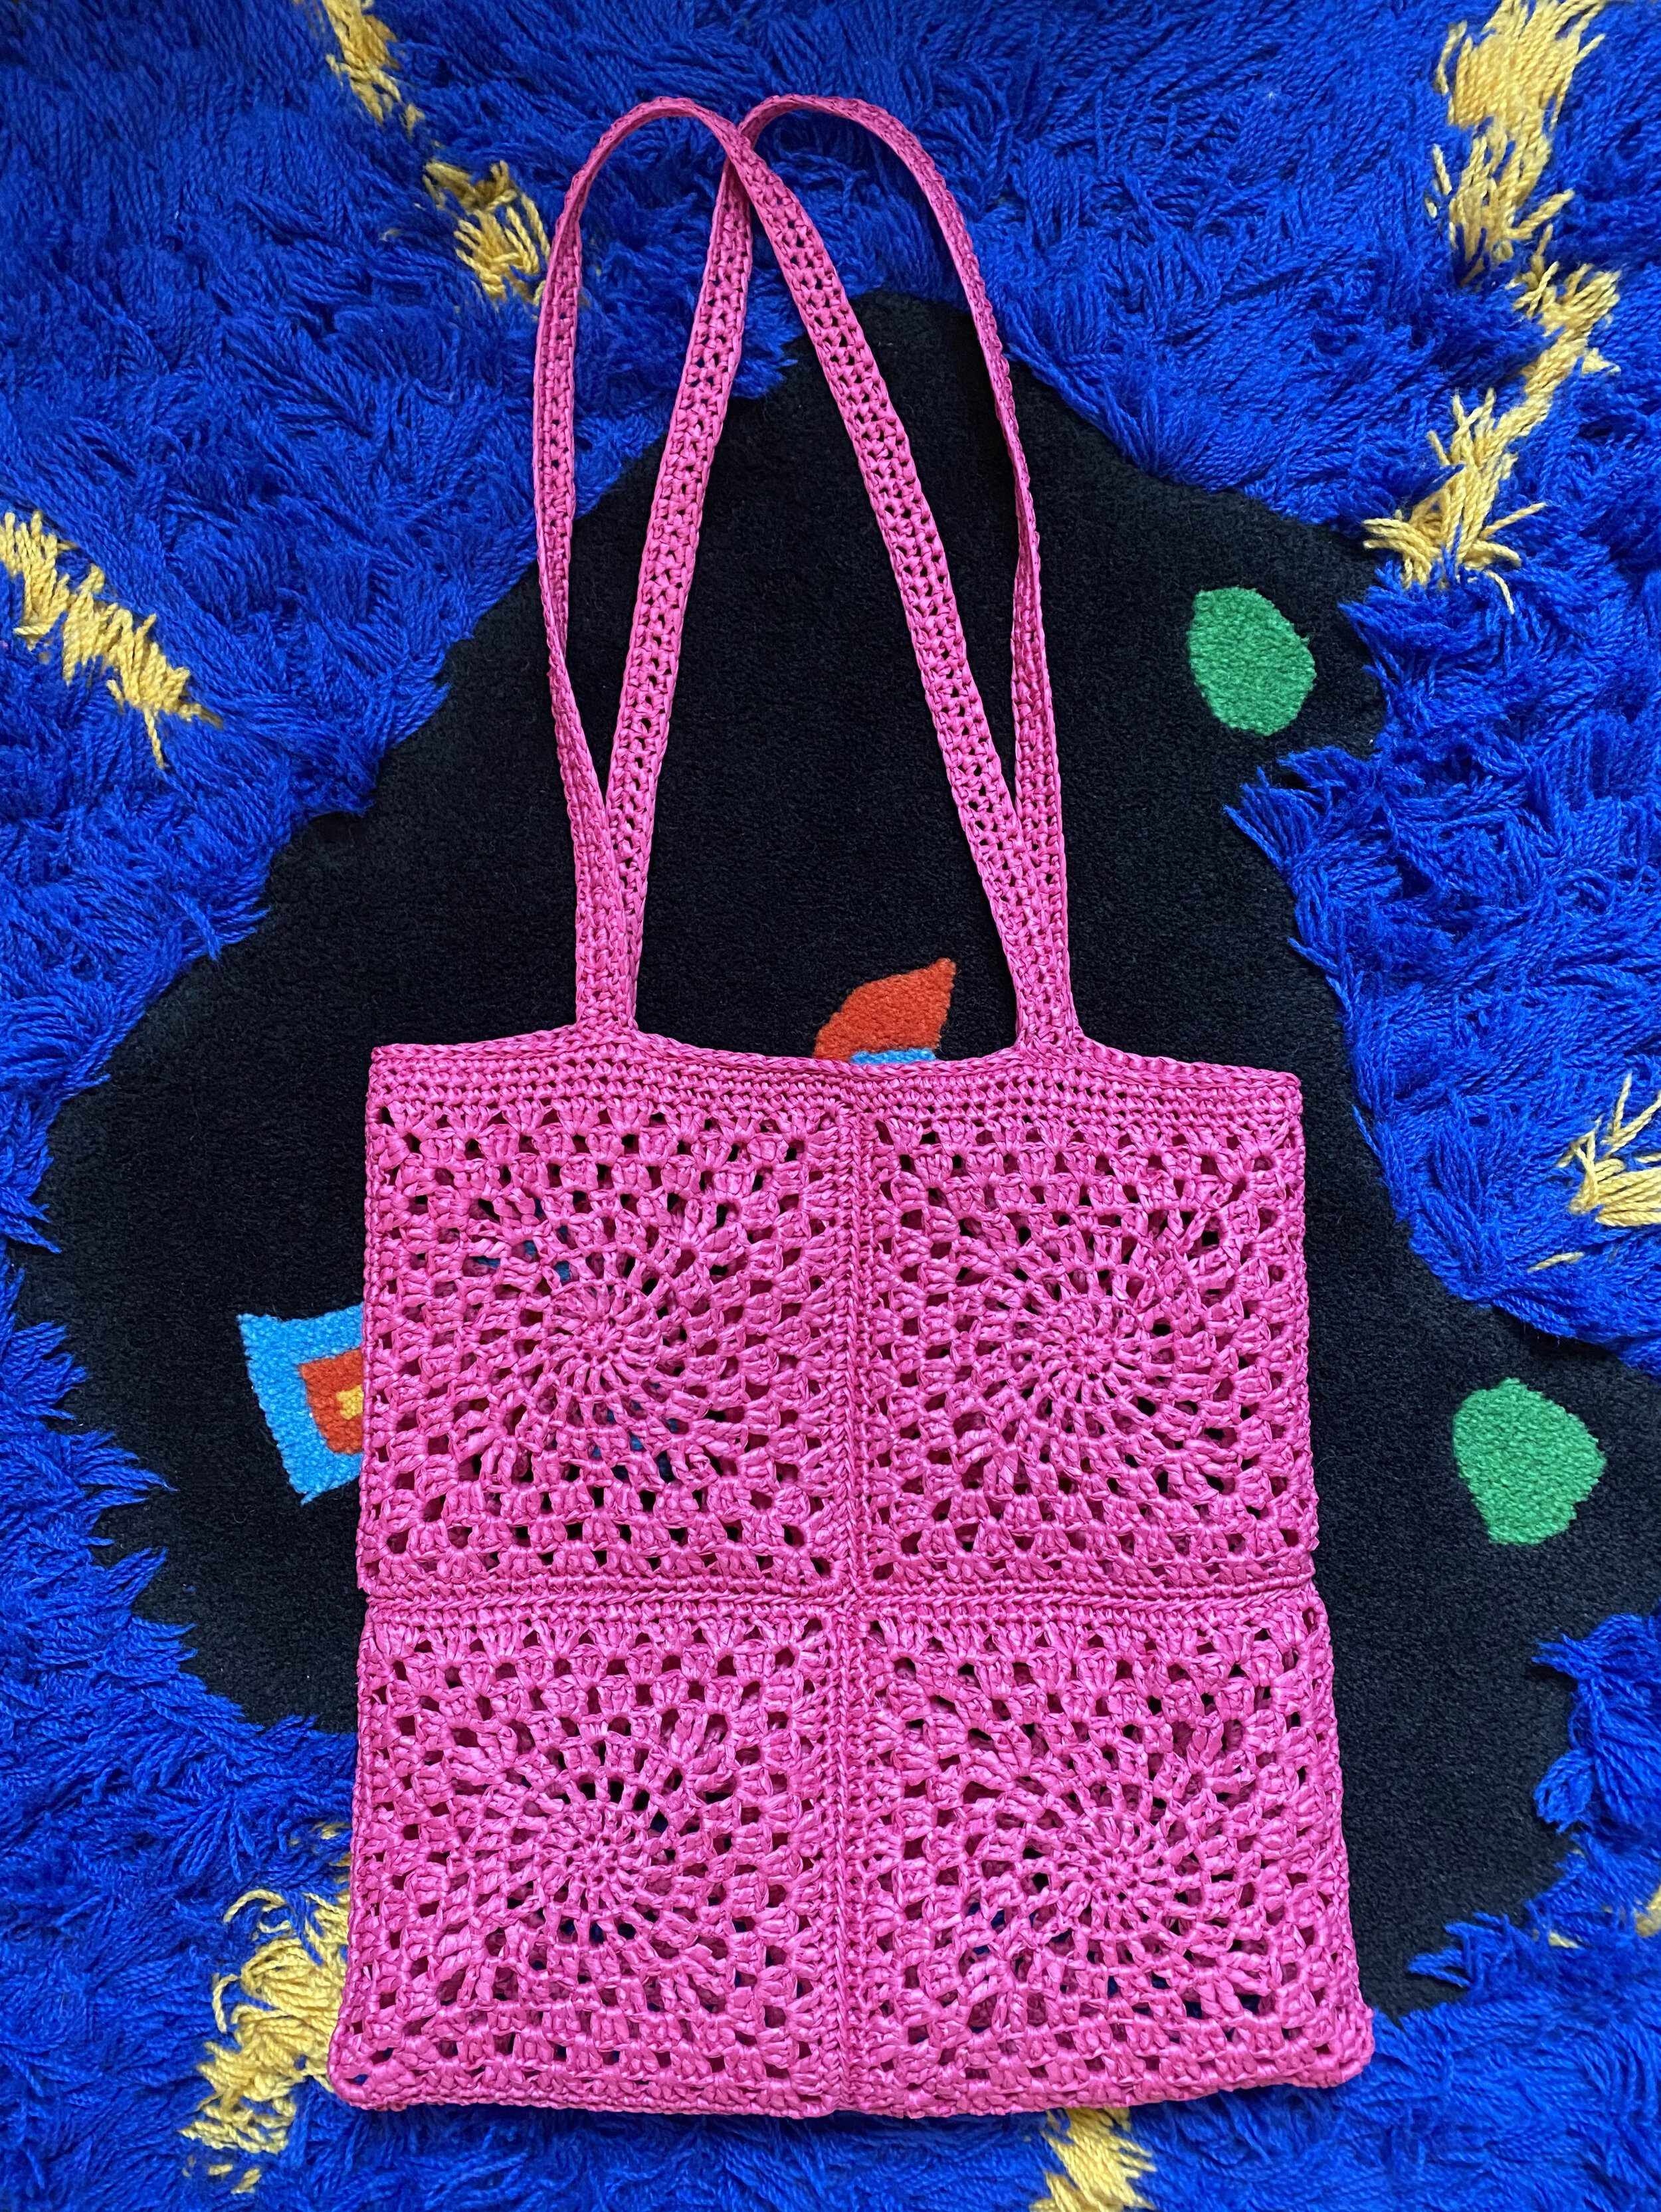  Rafia granny square crochet bag, pattern courtesy of Wool and the Gang 